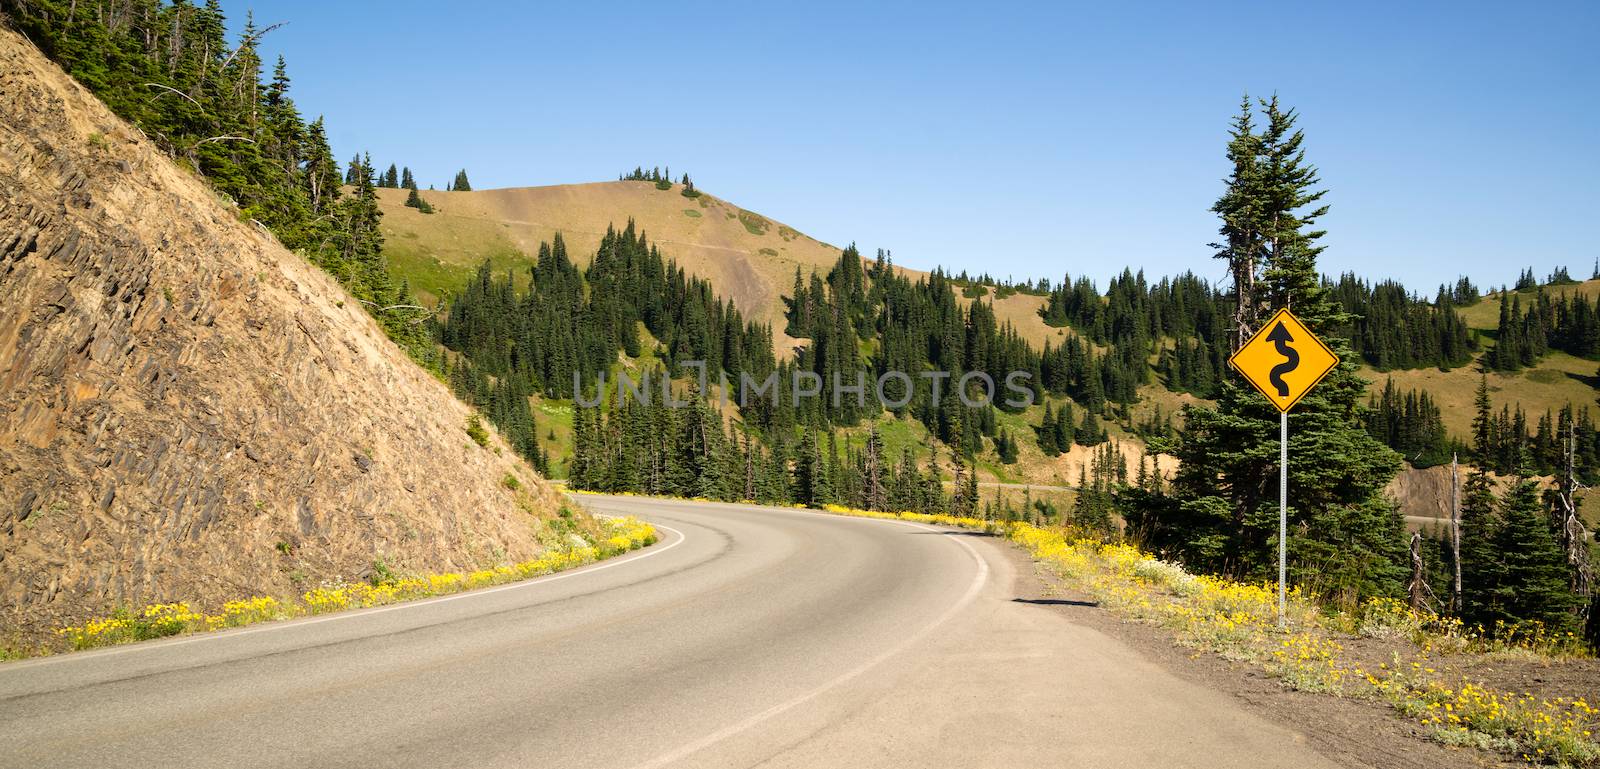 Horizontal composition of roadway in Olympic National Park